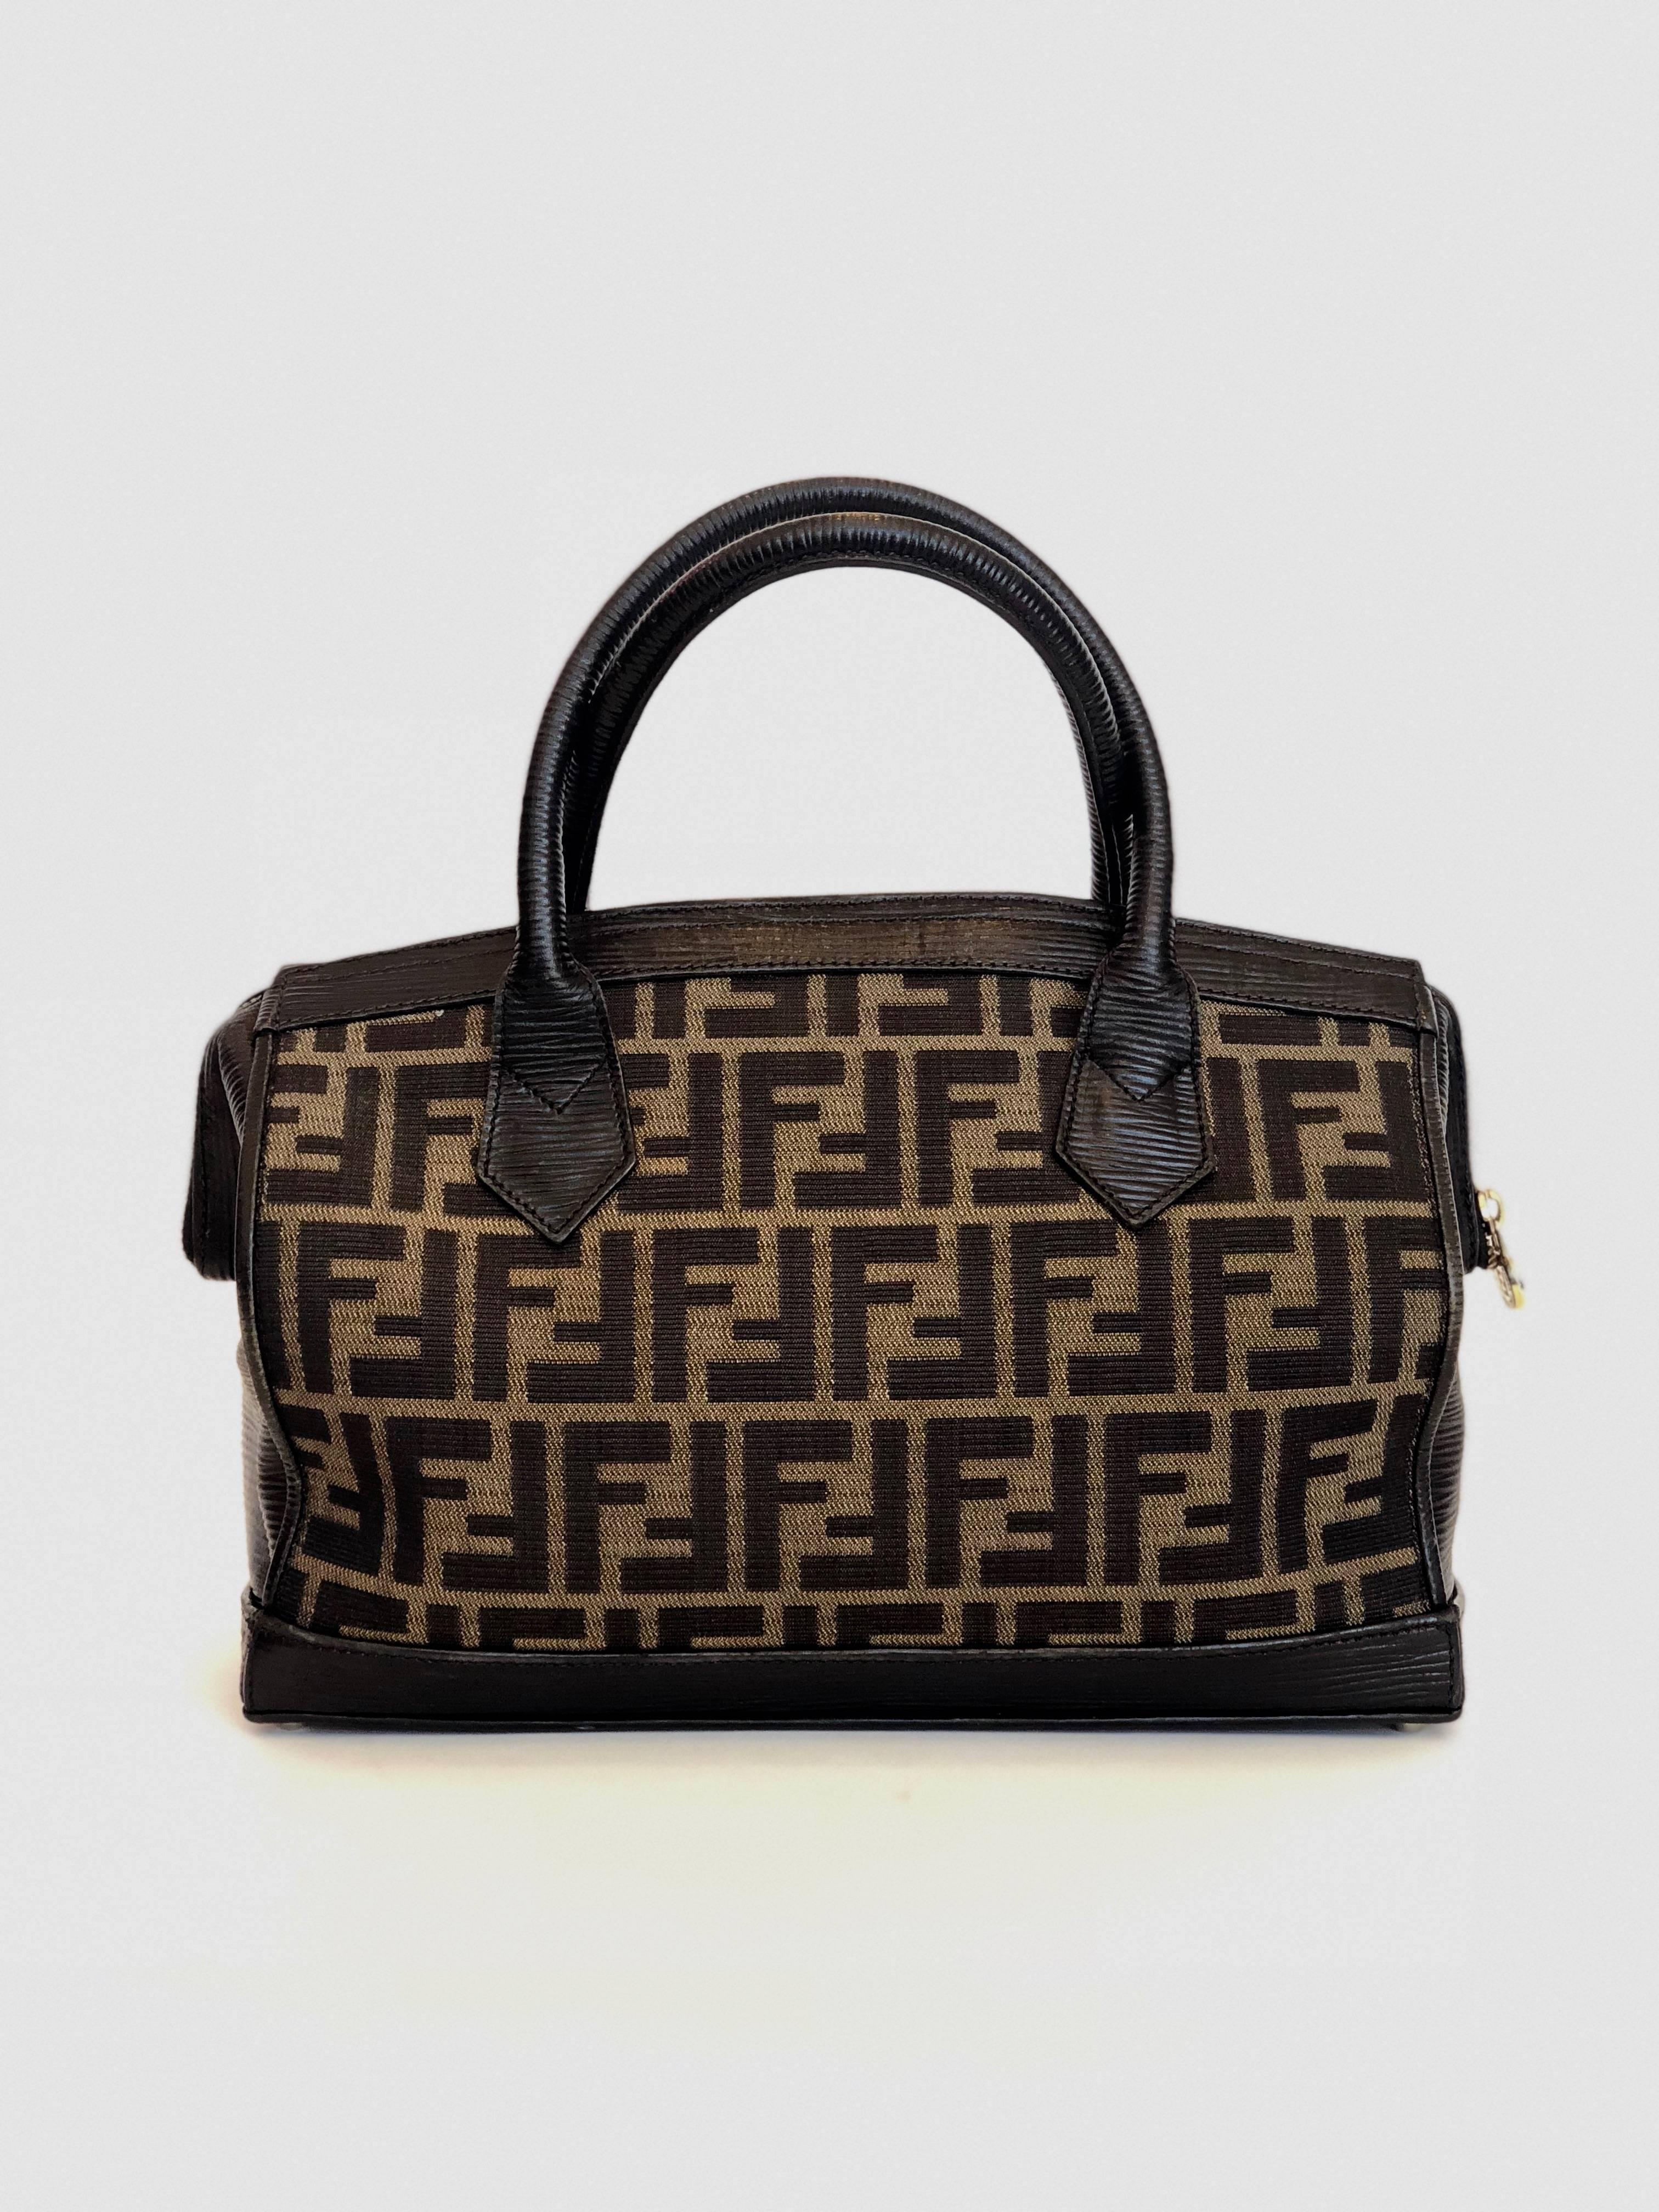 Fendi 1990's Brown and black logo bag. In good condition with no apparent wear.

*ALL MEASUREMENTS TAKEN FLAT*
Length: 11